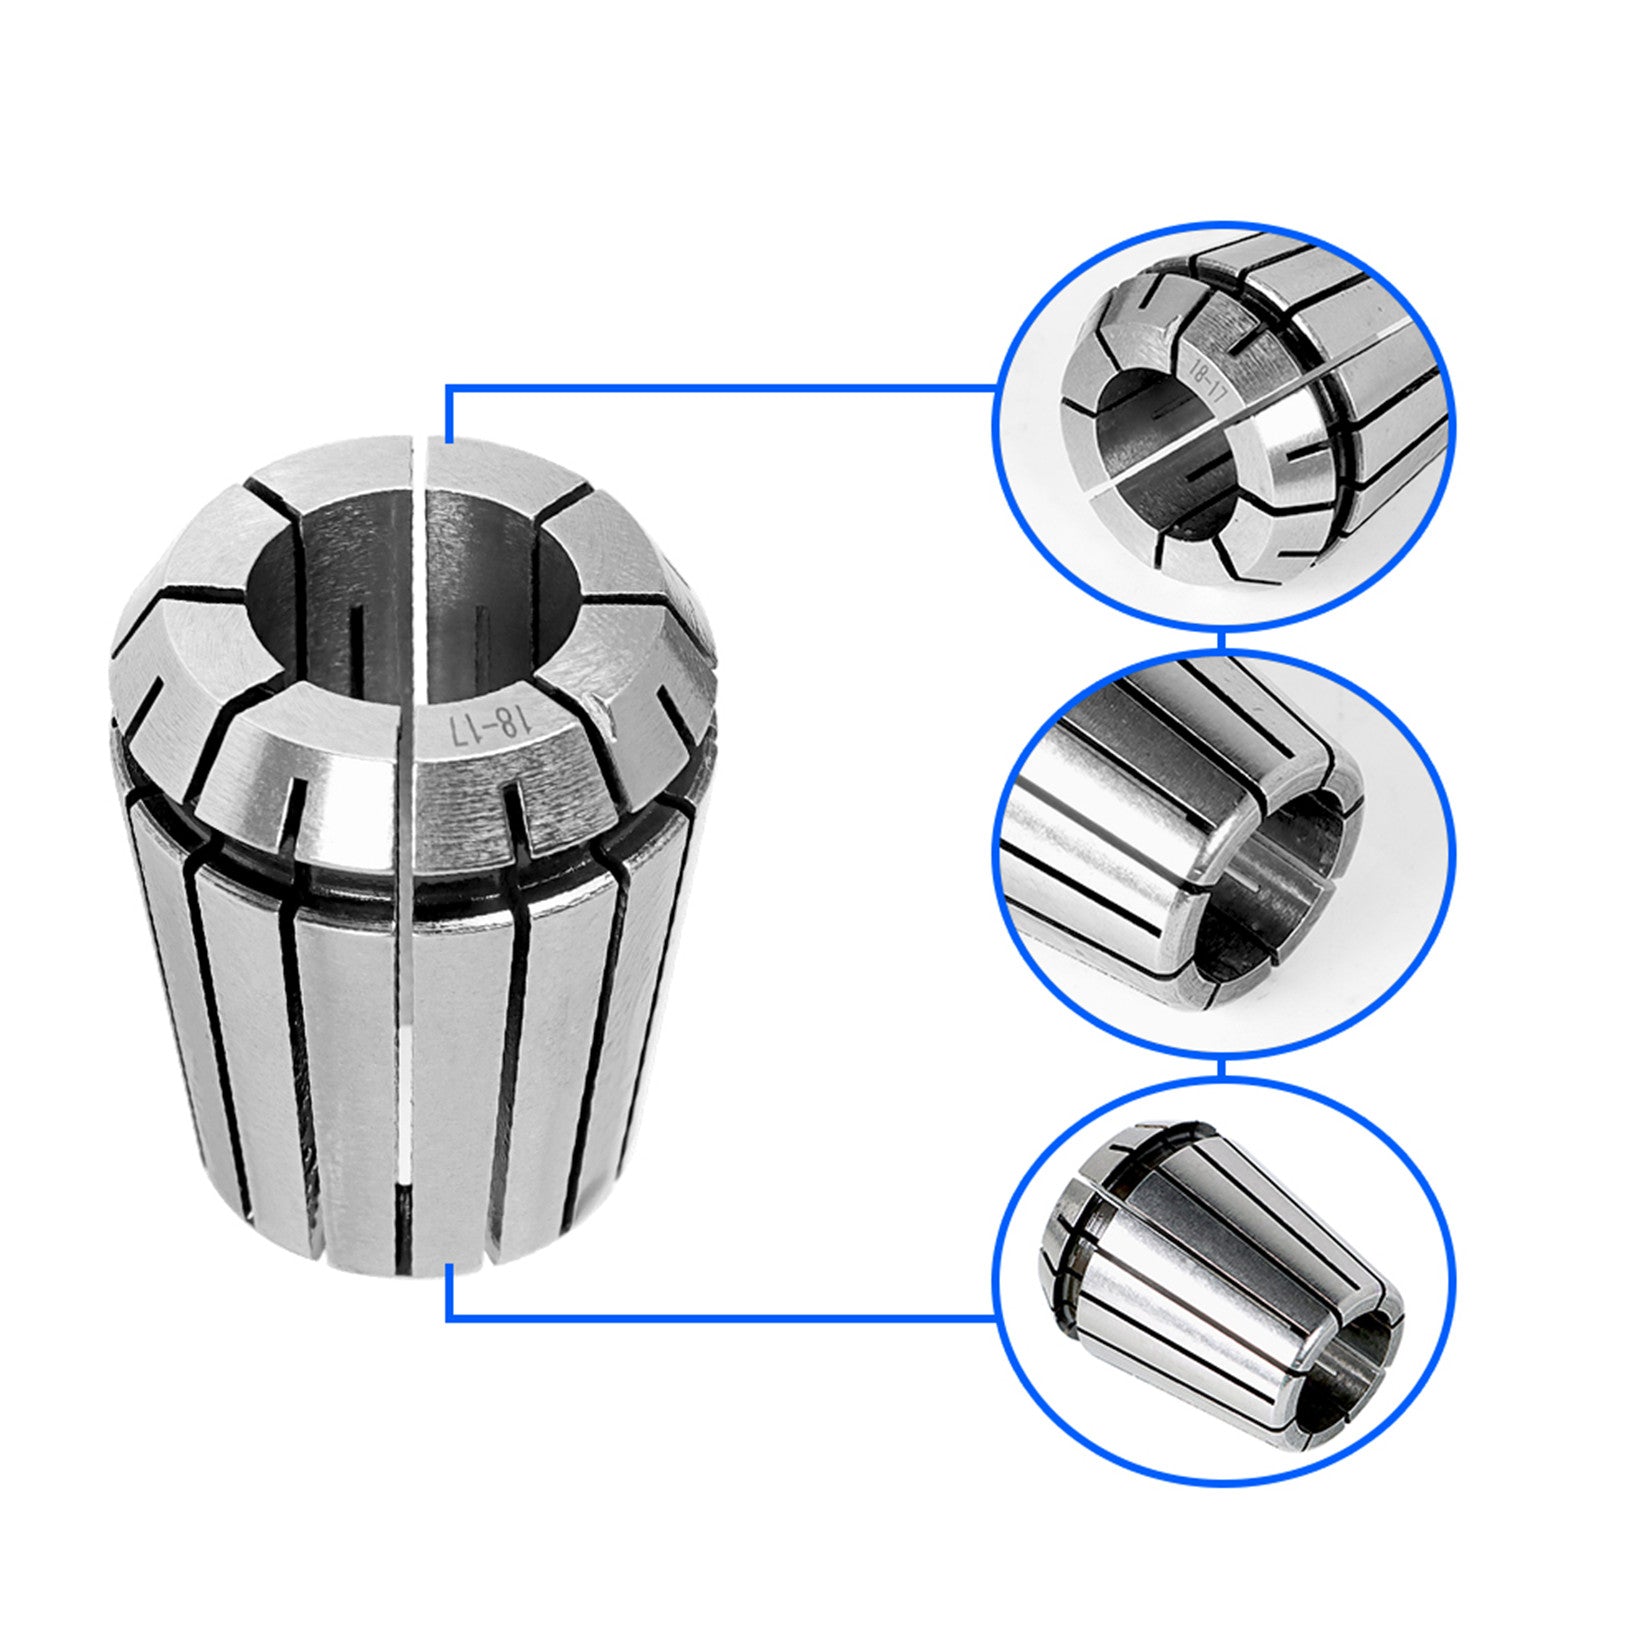 findmall ER32 Collet Set 19Pcs ER32 Collet Chuck Spring Collet Set CNC Engraving Milling Lathe Chuck Tool 2-20MM Fit for CNC Engraving Machine and Milling Lathe Tool FINDMALLPARTS